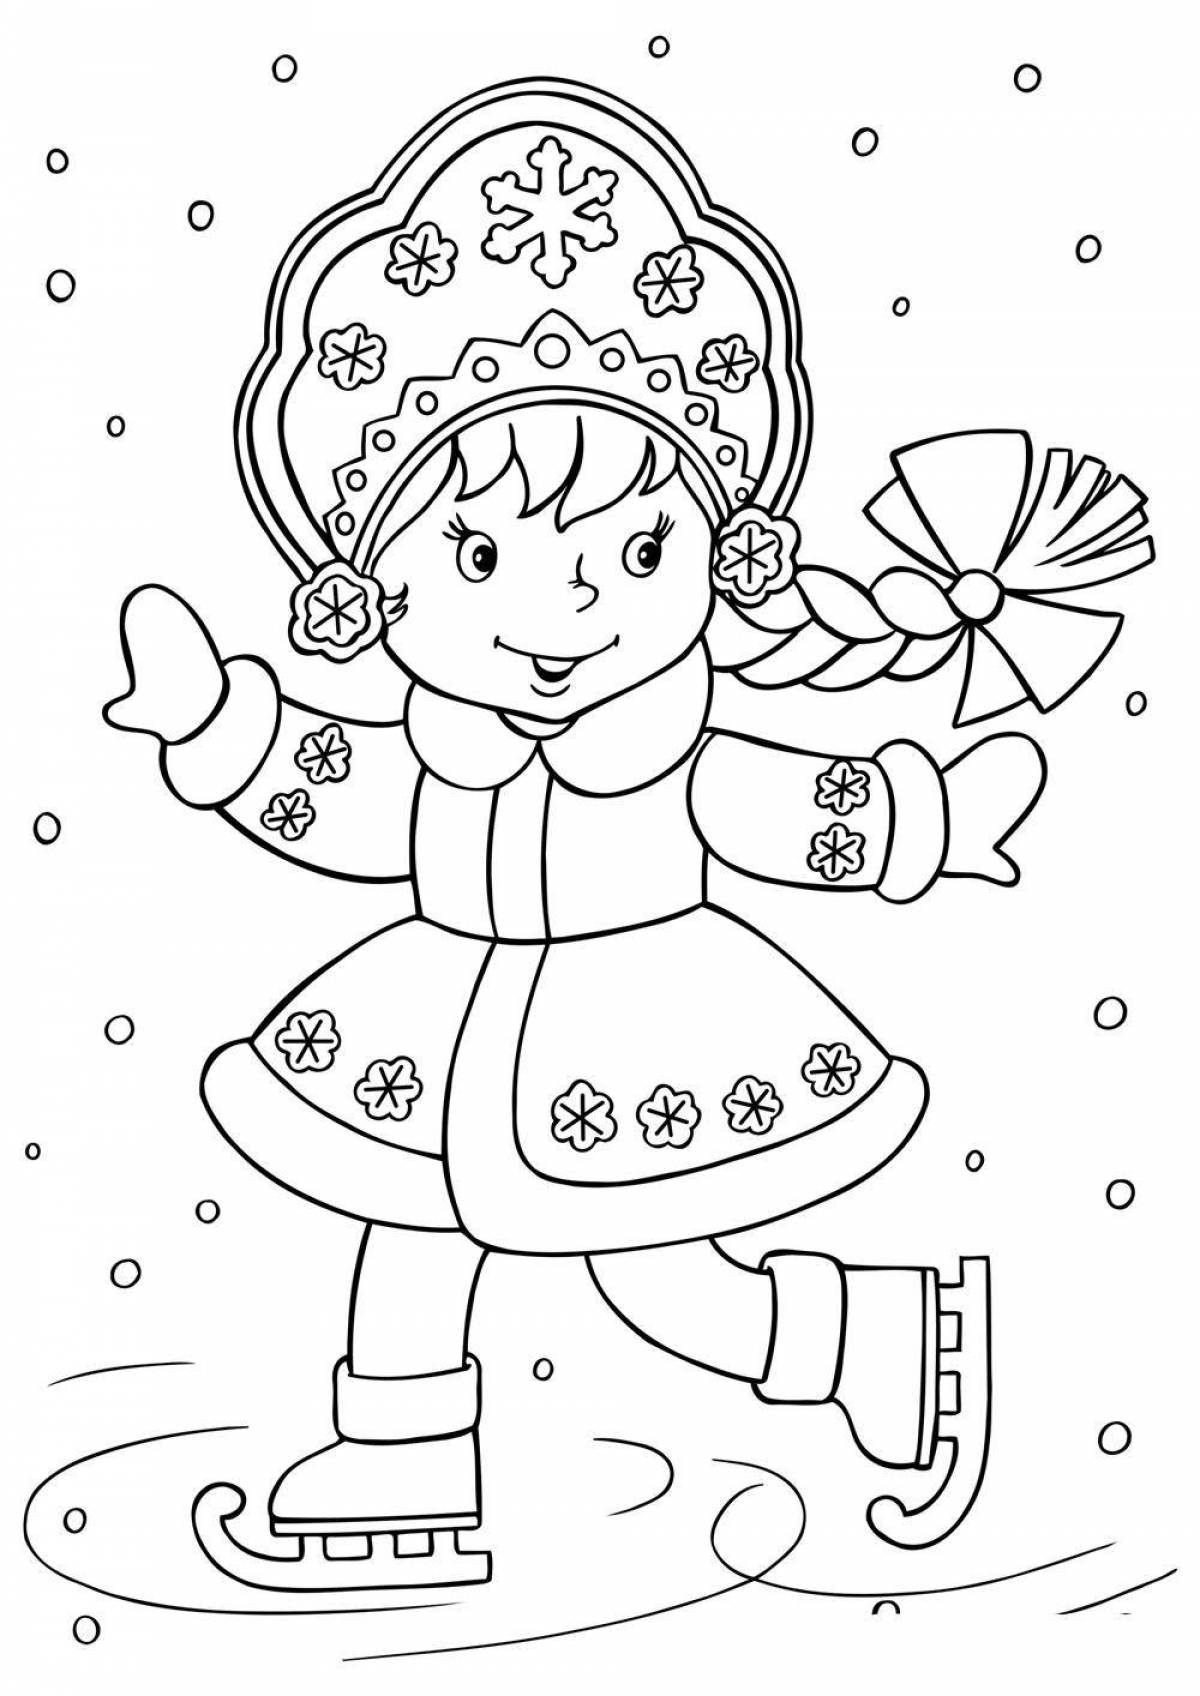 Animated Christmas coloring book for girls